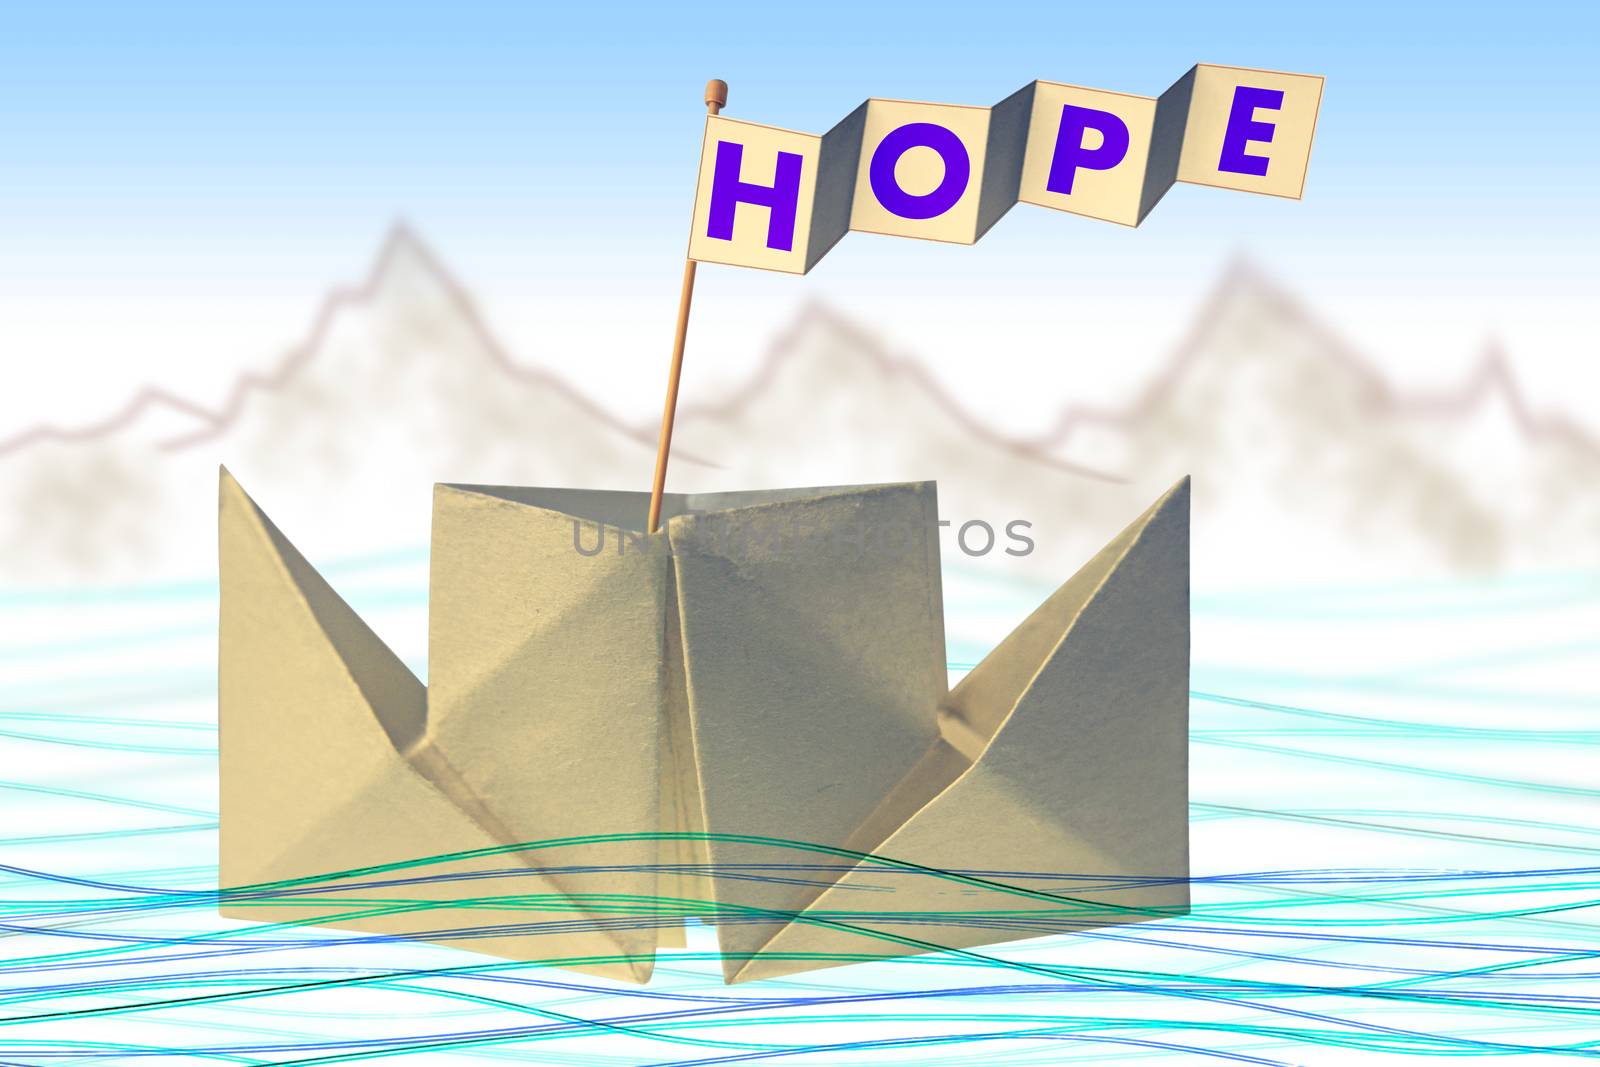 Origami paper boat with flag writing HOPE by yands